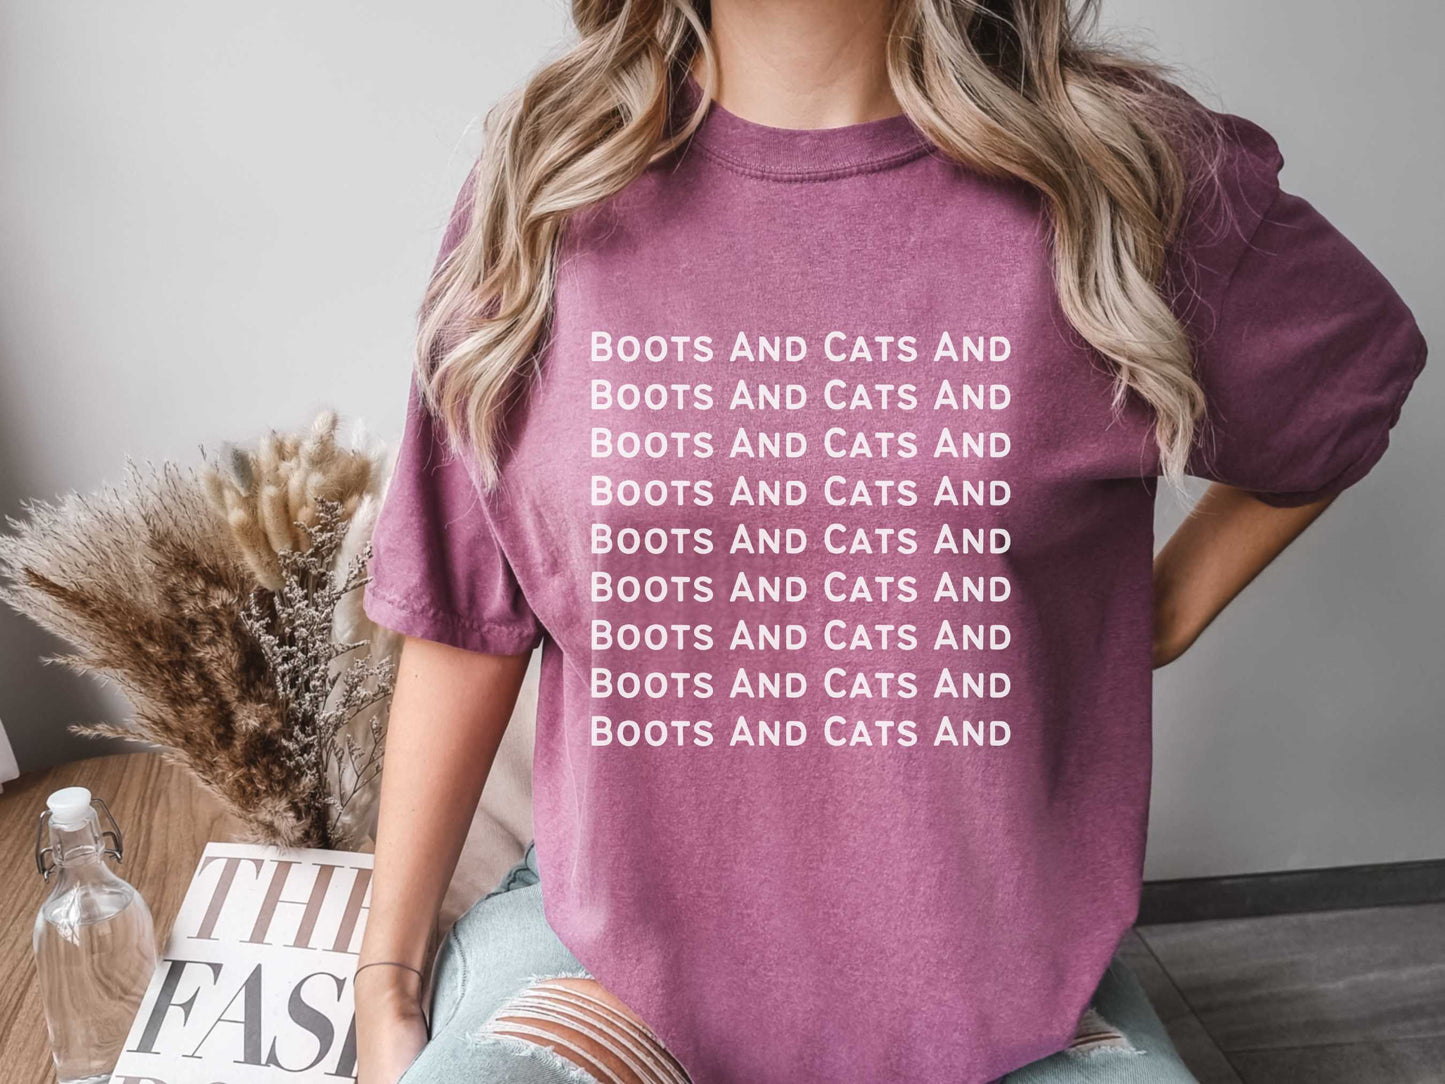 Funny Beatboxing "Boots And Cats" T-Shirt in Berry